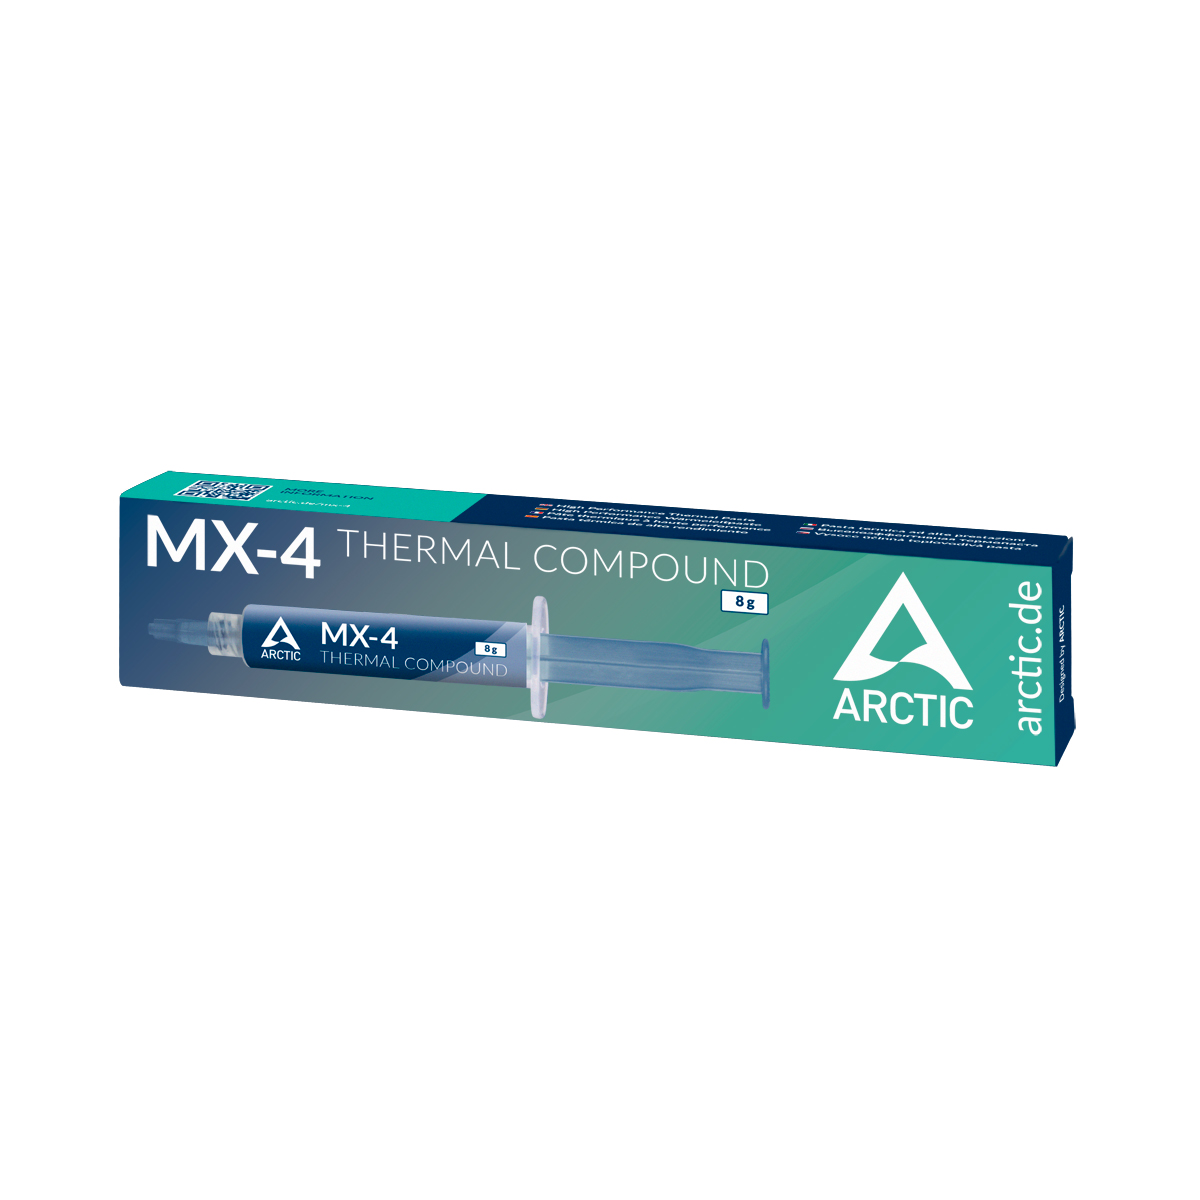 ARCTIC MX-6 Ultimate Performance 4g + 6x MX Cleaner desde 10,30 €